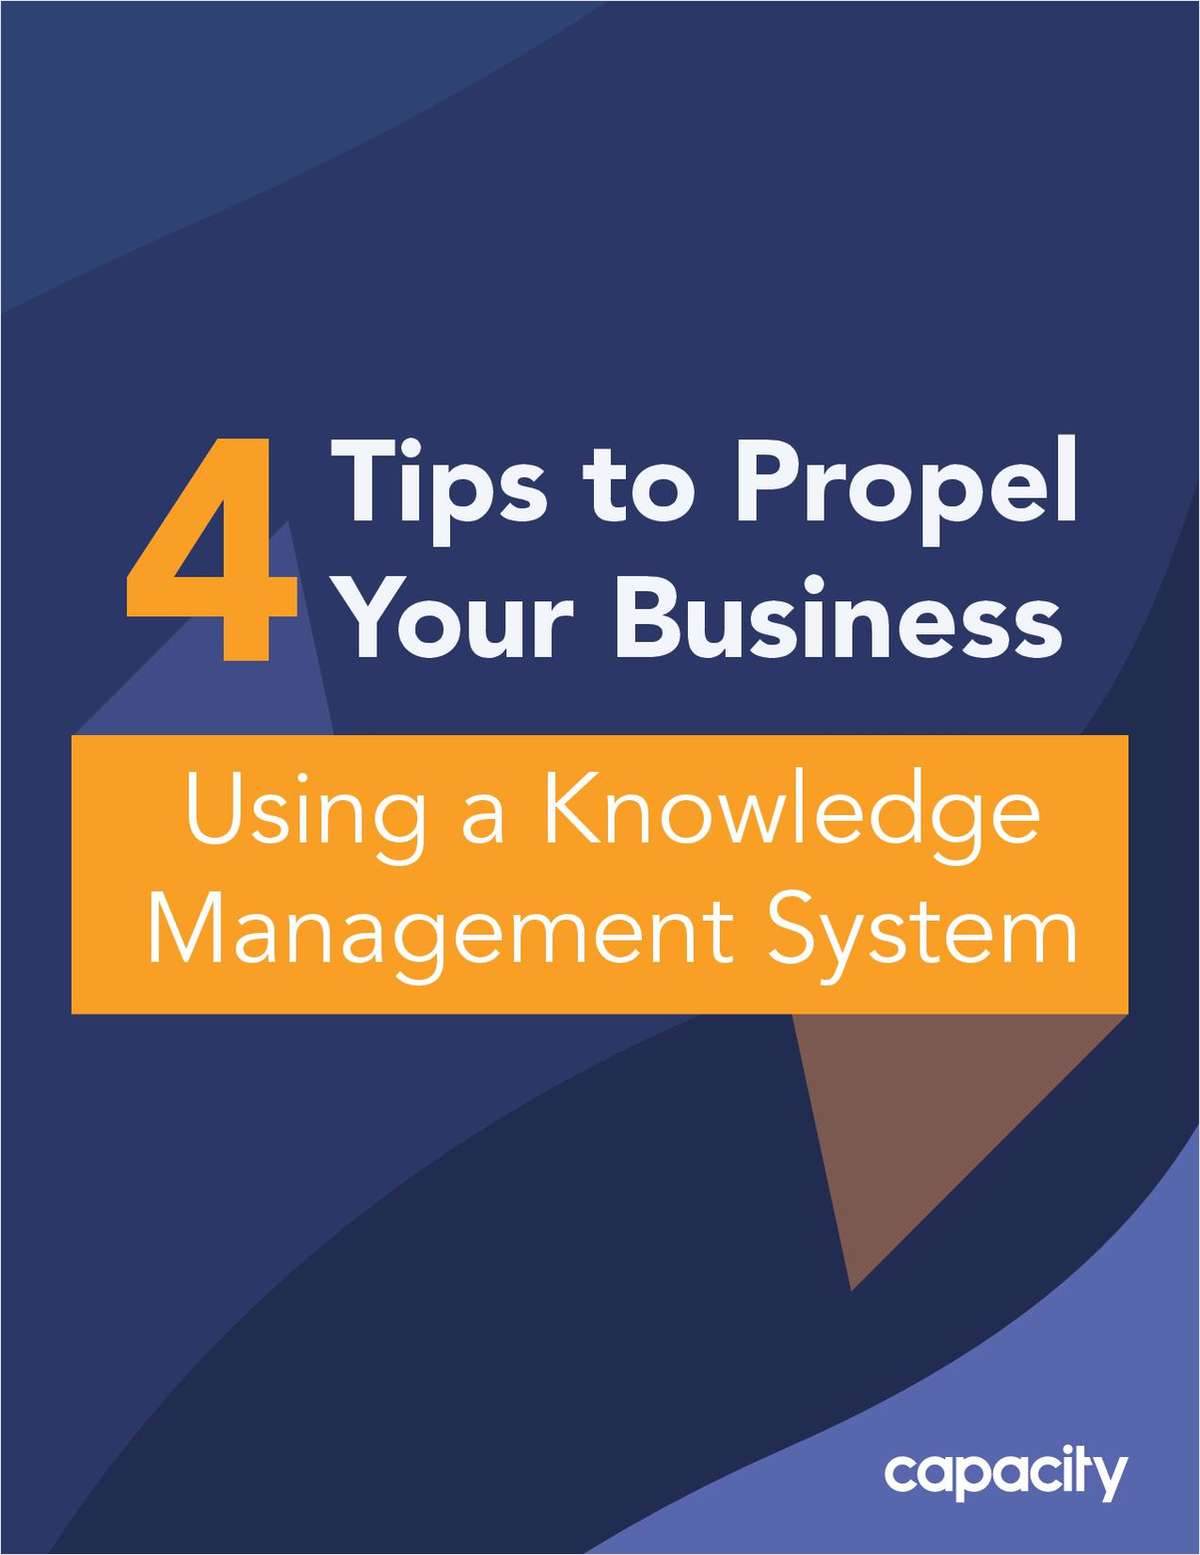 4 Tips to Propel Your Business Using a Knowledge Management System